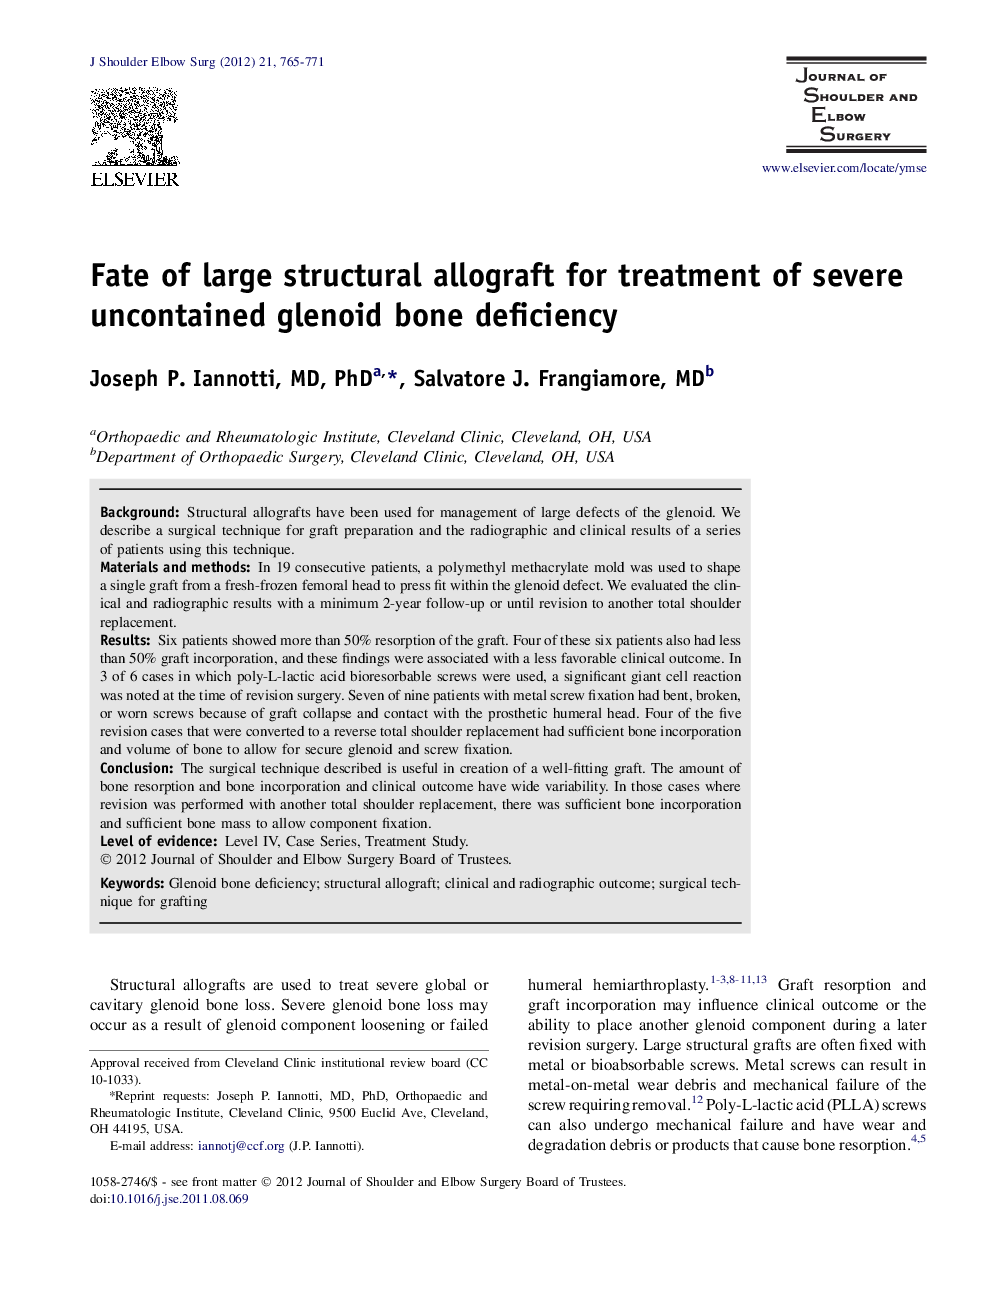 Fate of large structural allograft for treatment of severe uncontained glenoid bone deficiency 